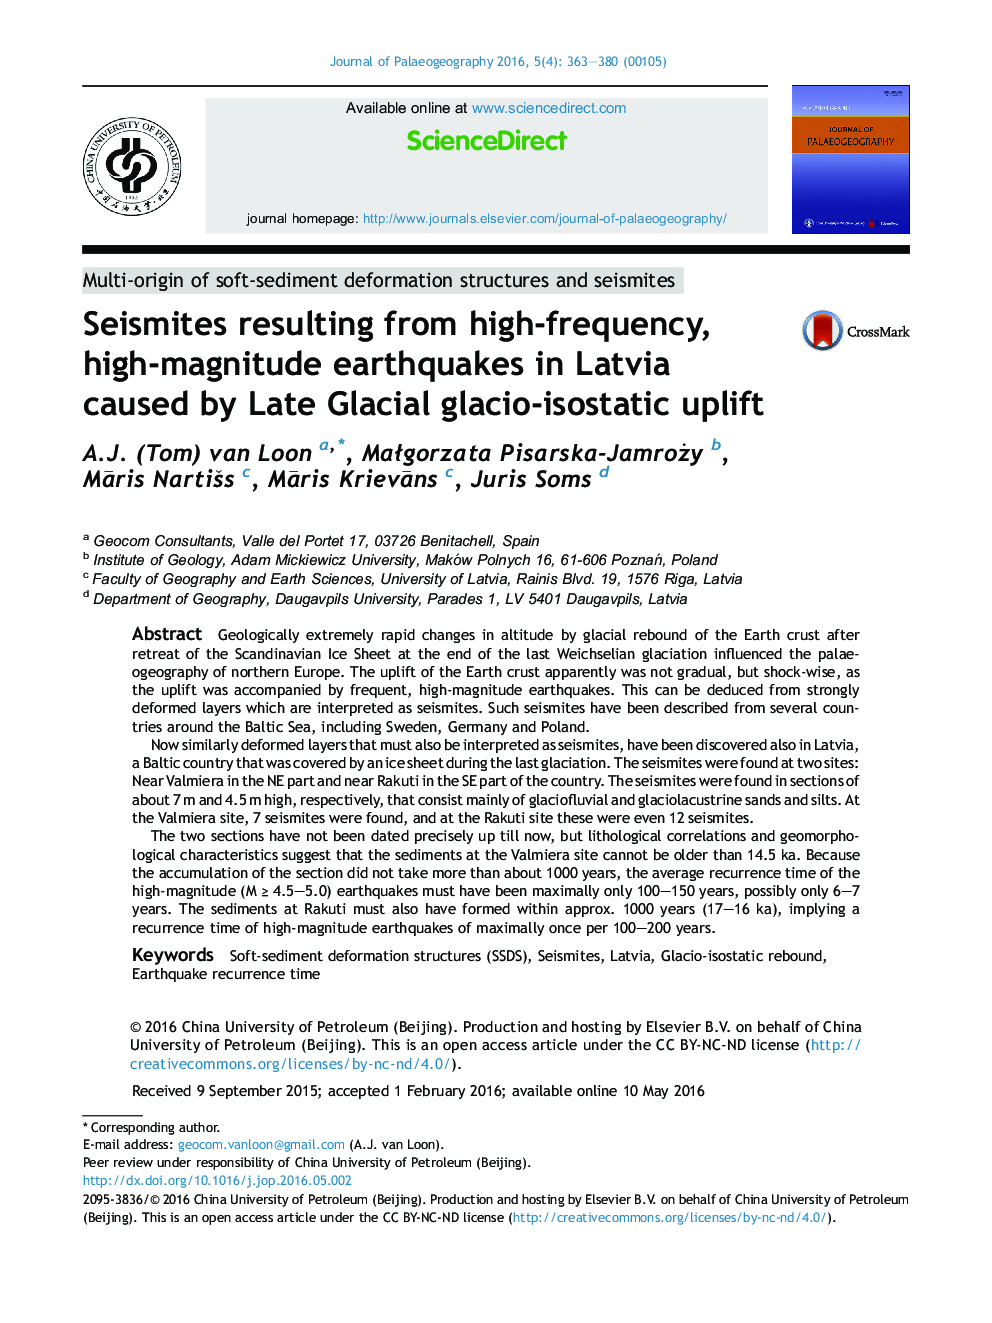 Seismites resulting from high-frequency, high-magnitude earthquakes in Latvia caused by Late Glacial glacio-isostatic uplift 